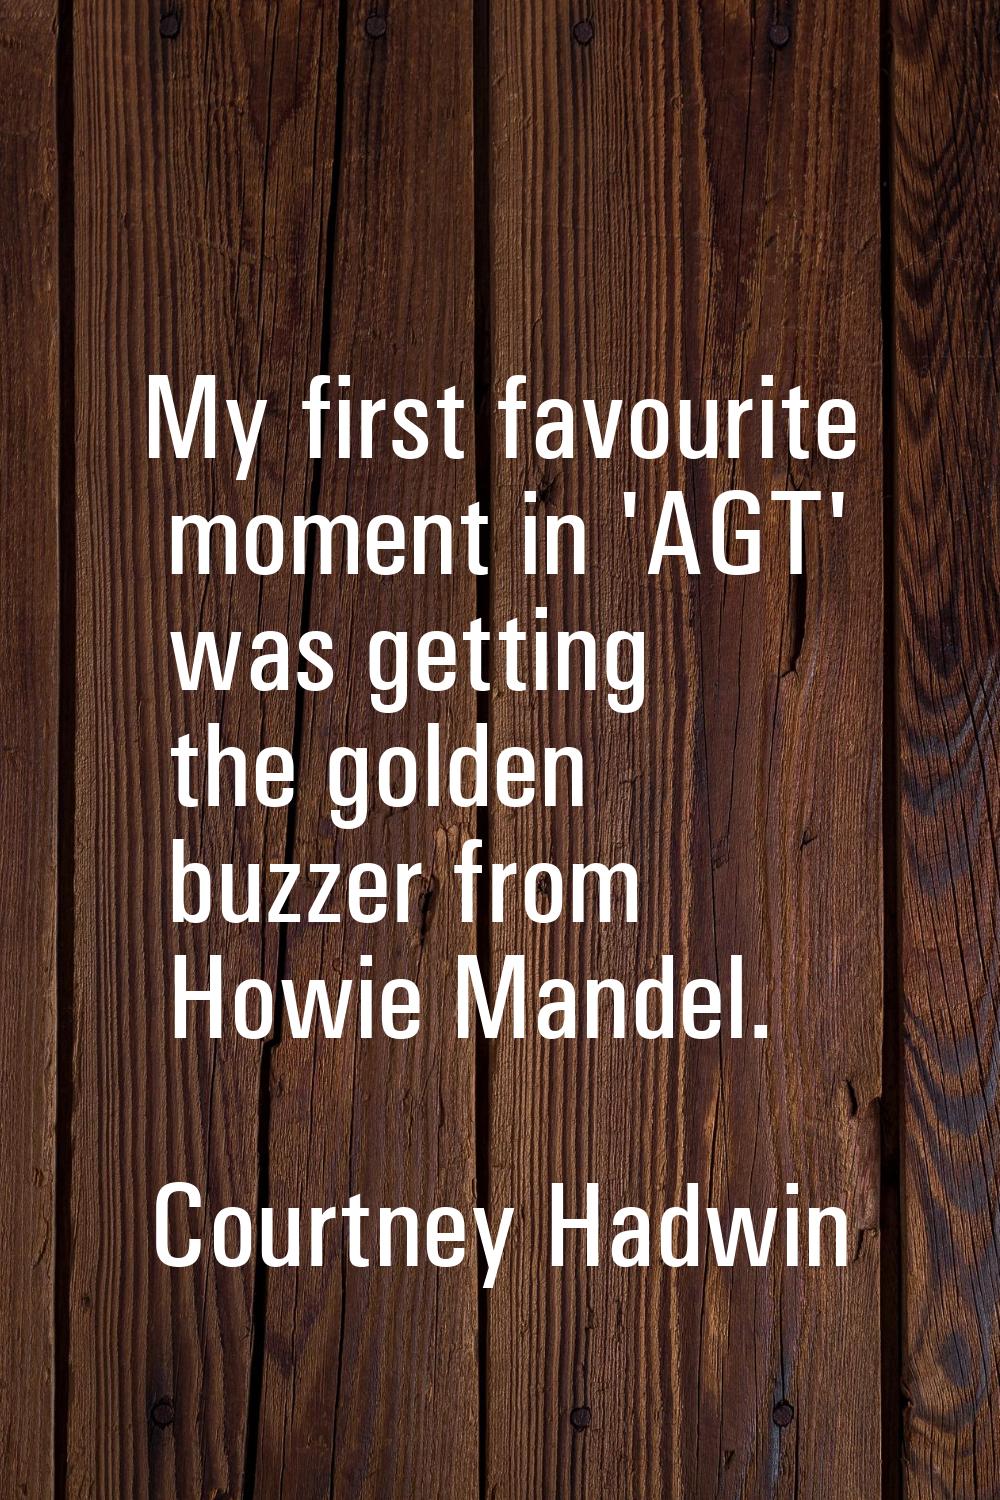 My first favourite moment in 'AGT' was getting the golden buzzer from Howie Mandel.